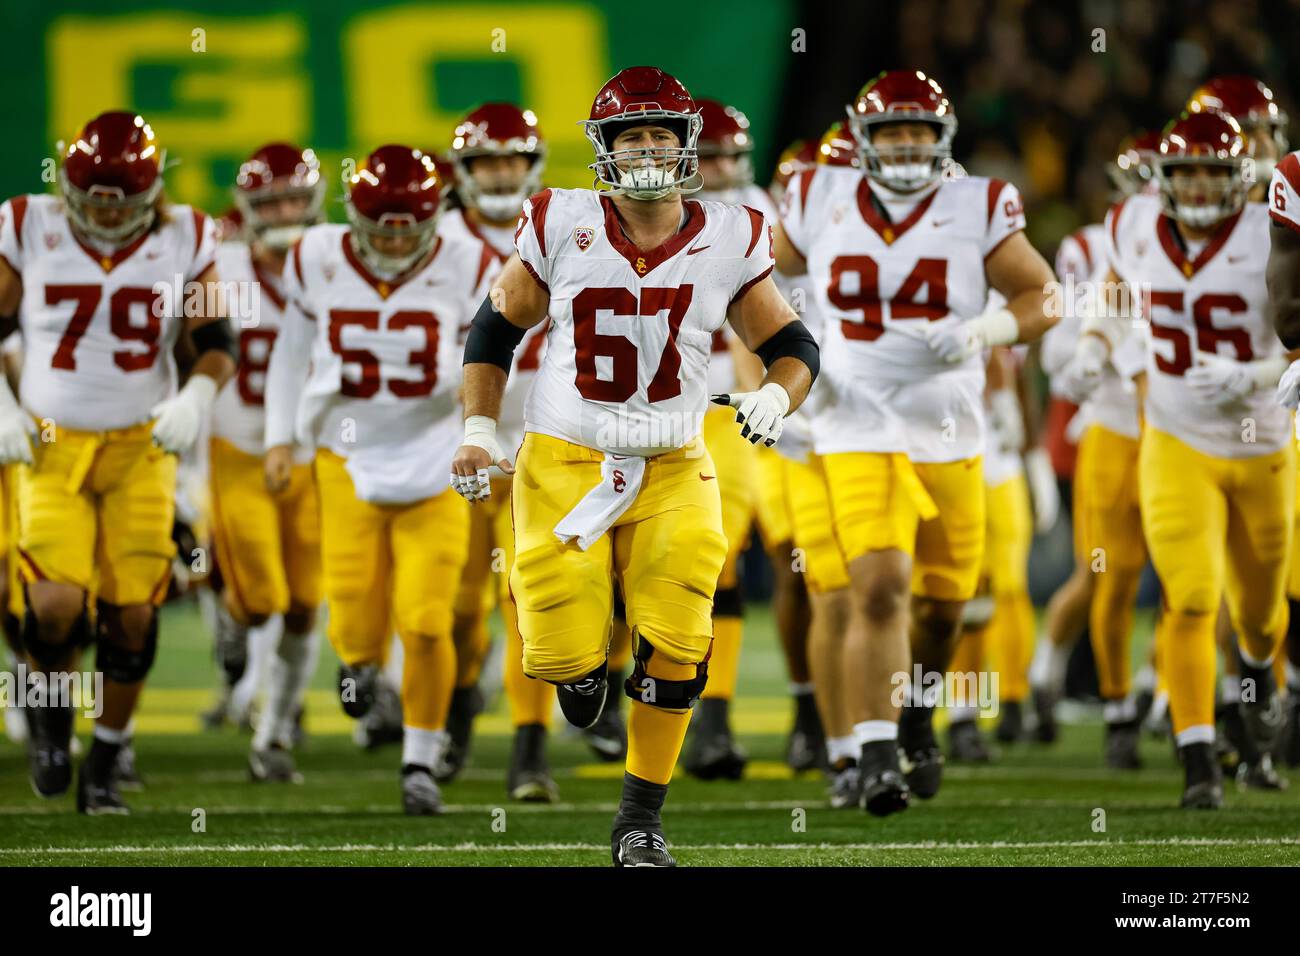 Members of the USC Trojans run out onto the field prior to a college football regular season game against the Oregon Ducks, Saturday, November 11, 202 Stock Photo